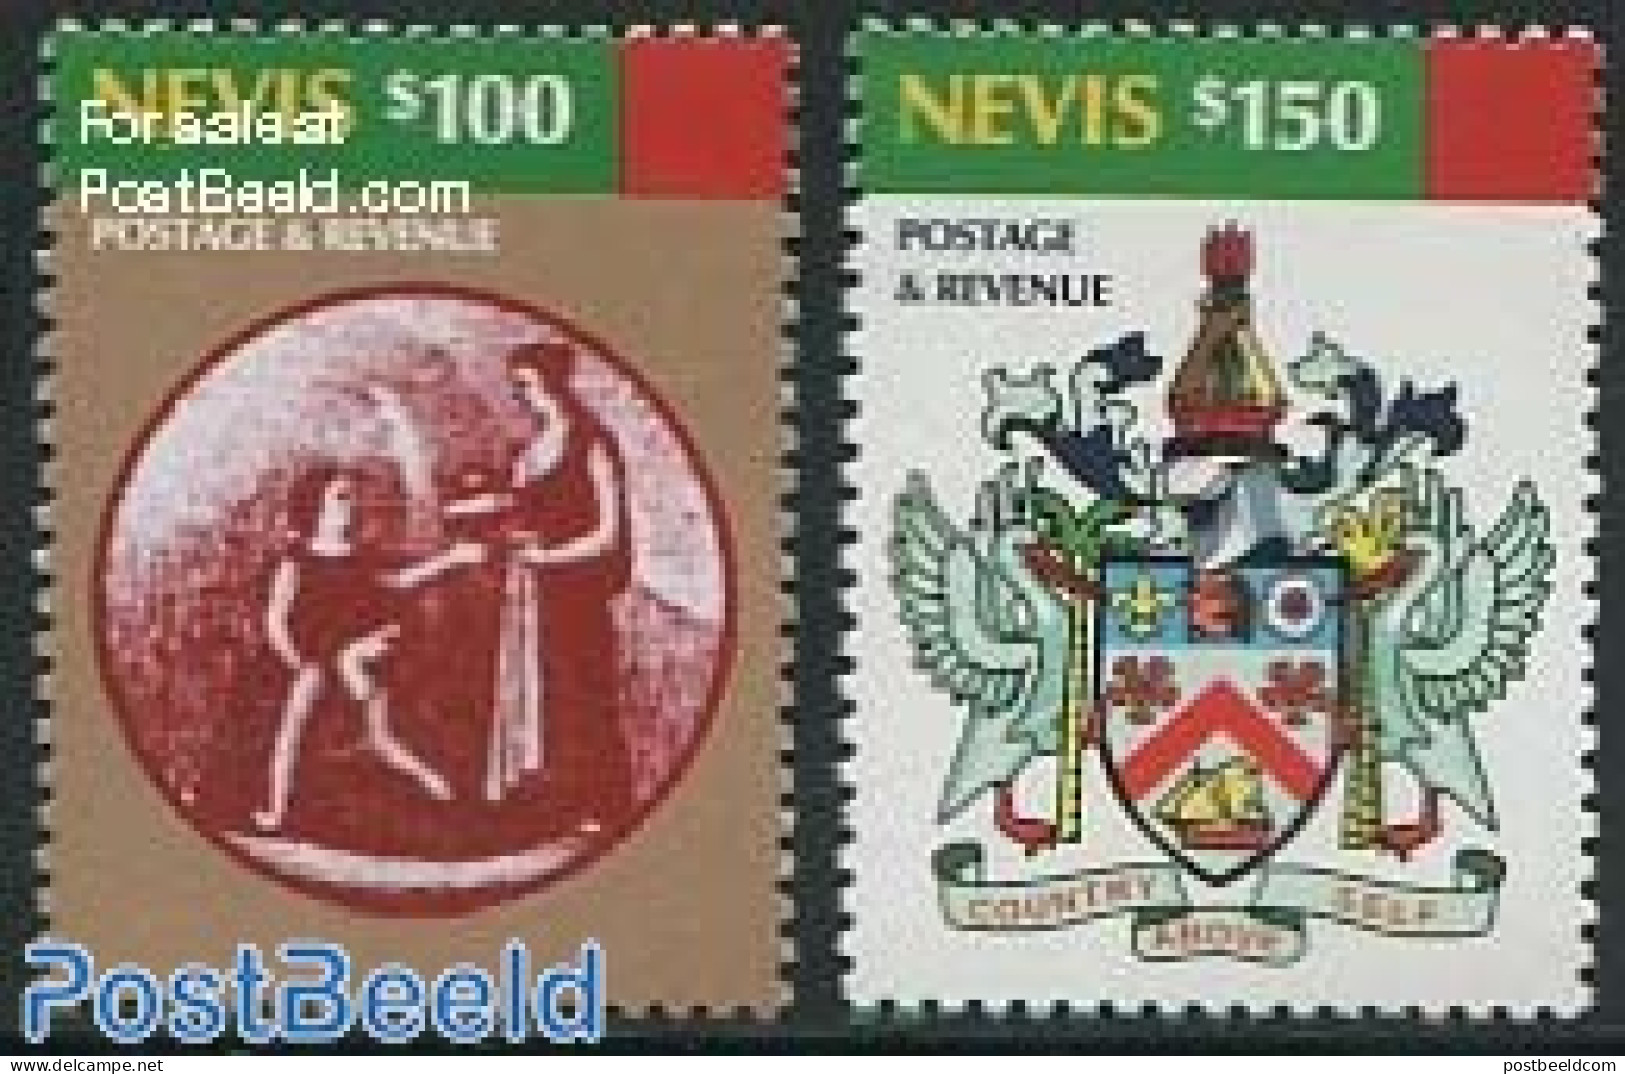 Nevis 2012 Definitives 2v, Mint NH, History - Coat Of Arms - St.Kitts Und Nevis ( 1983-...)